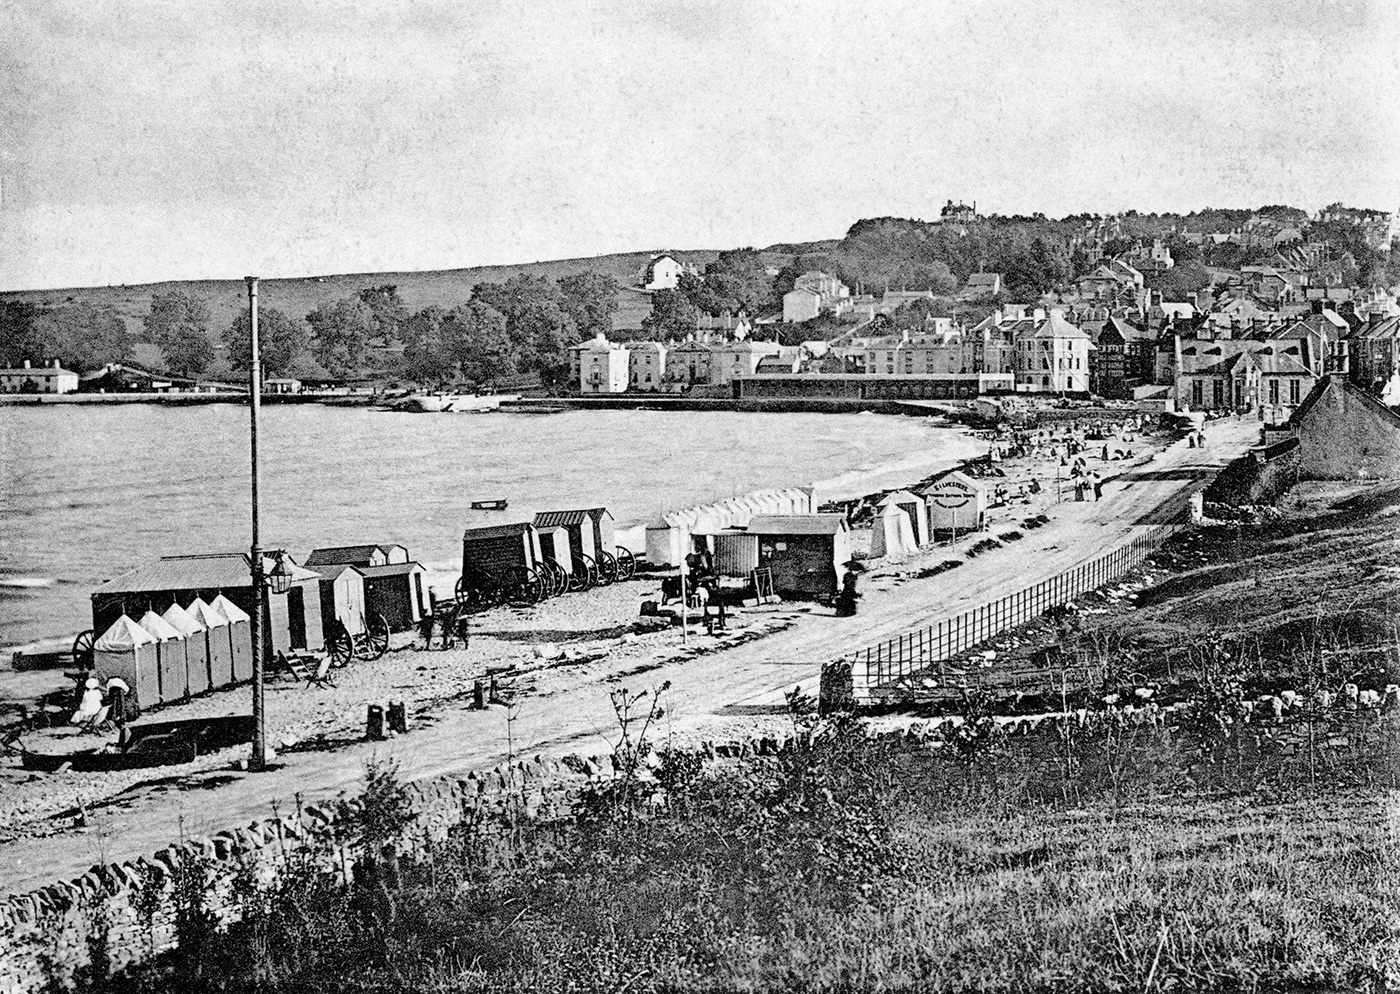 Shore Road in the 1800s